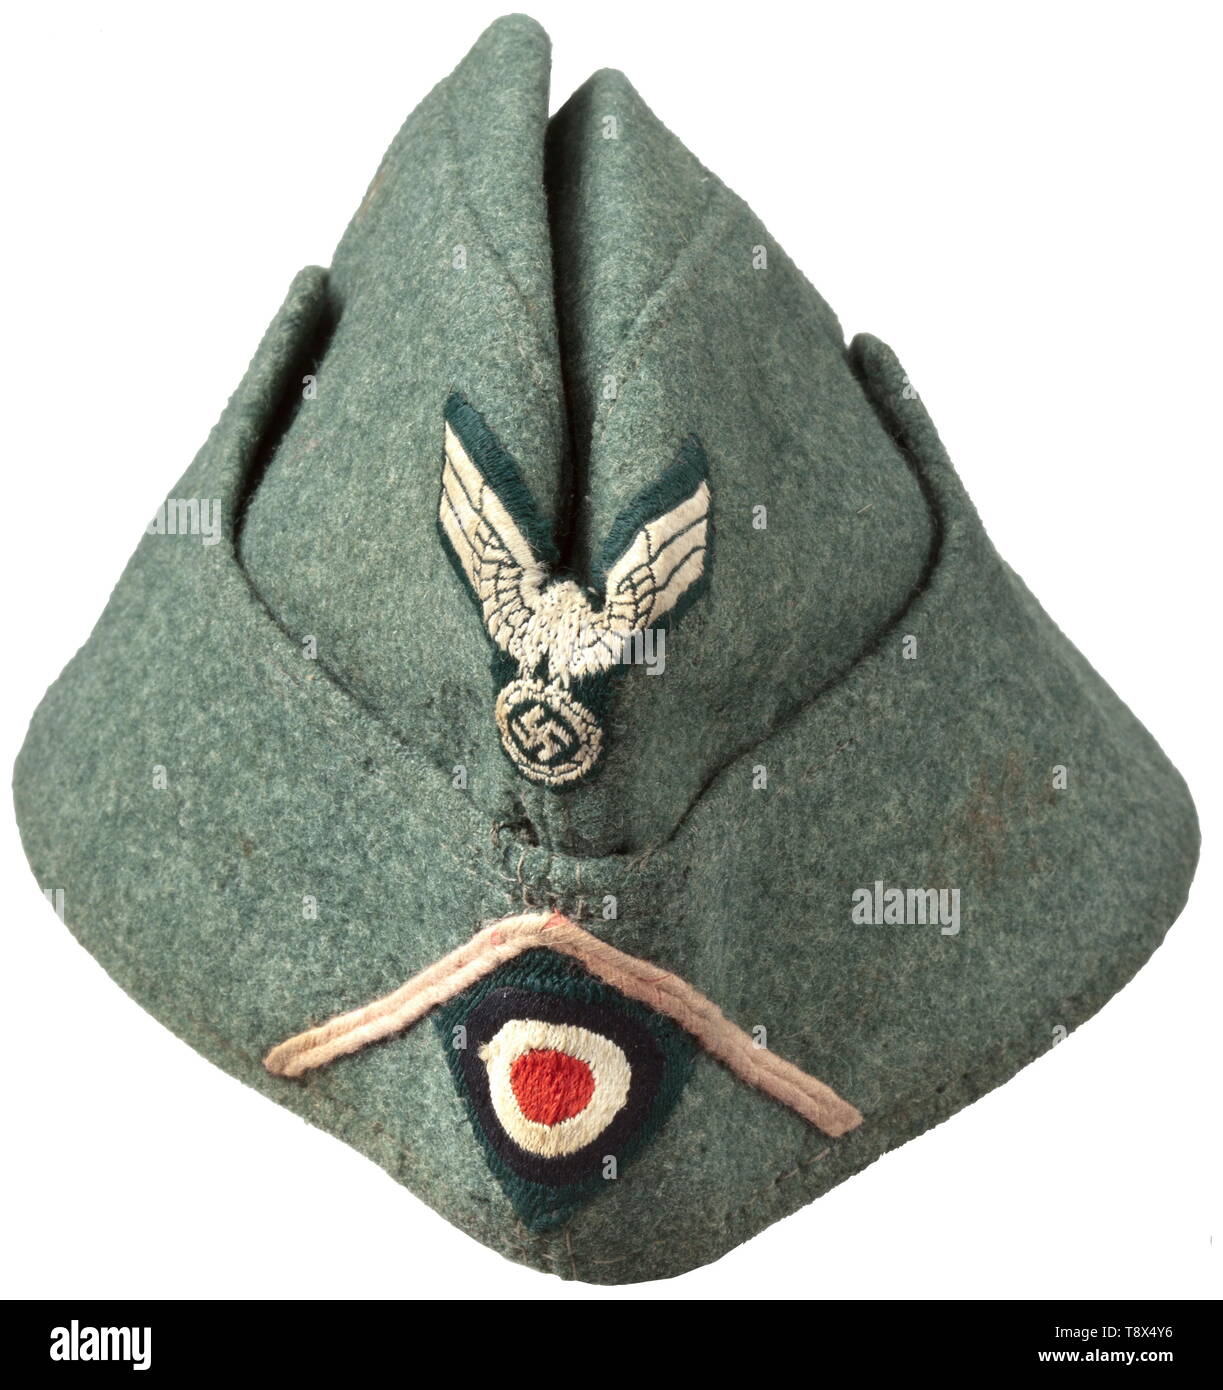 A garrison cap M 38 'Schiffchen' for enlisted men/NCOs of panzer troops Depot piece of field-grey woollen cloth, field-grey painted fine zinc ventilation rivets, brownish inner liner with faded maker's stamping, BeVo weave insignia on a dark green ground, pink soutache chevron. Light signs of usage and age. historic, historical, army, armies, armed forces, military, militaria, object, objects, stills, clipping, clippings, cut out, cut-out, cut-outs, 20th century, Editorial-Use-Only Stock Photo